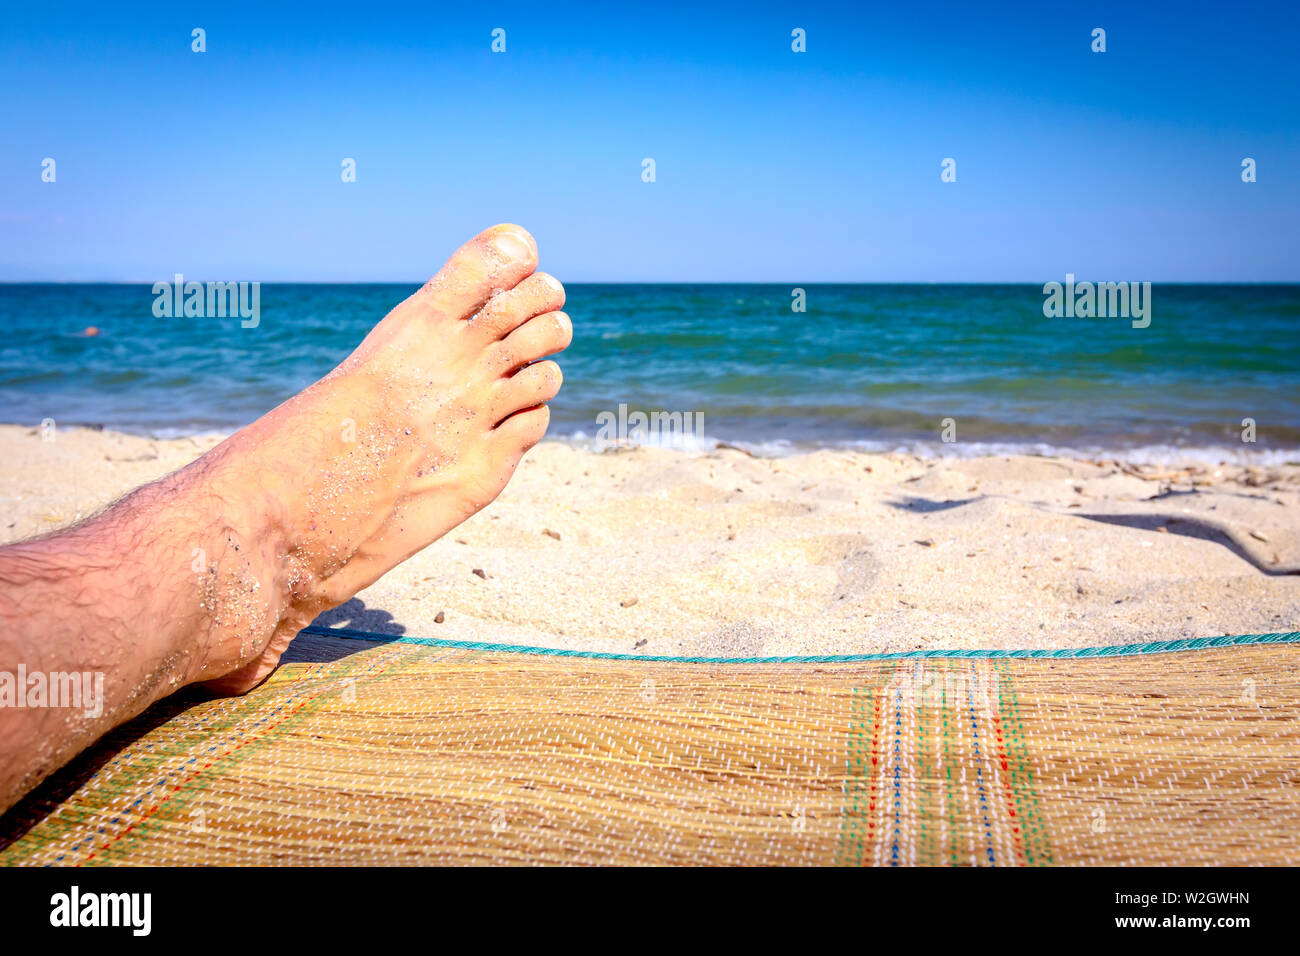 Man's legs until is sunbathing by lying carefree on mat next to the coastline, on public beach. Stock Photo